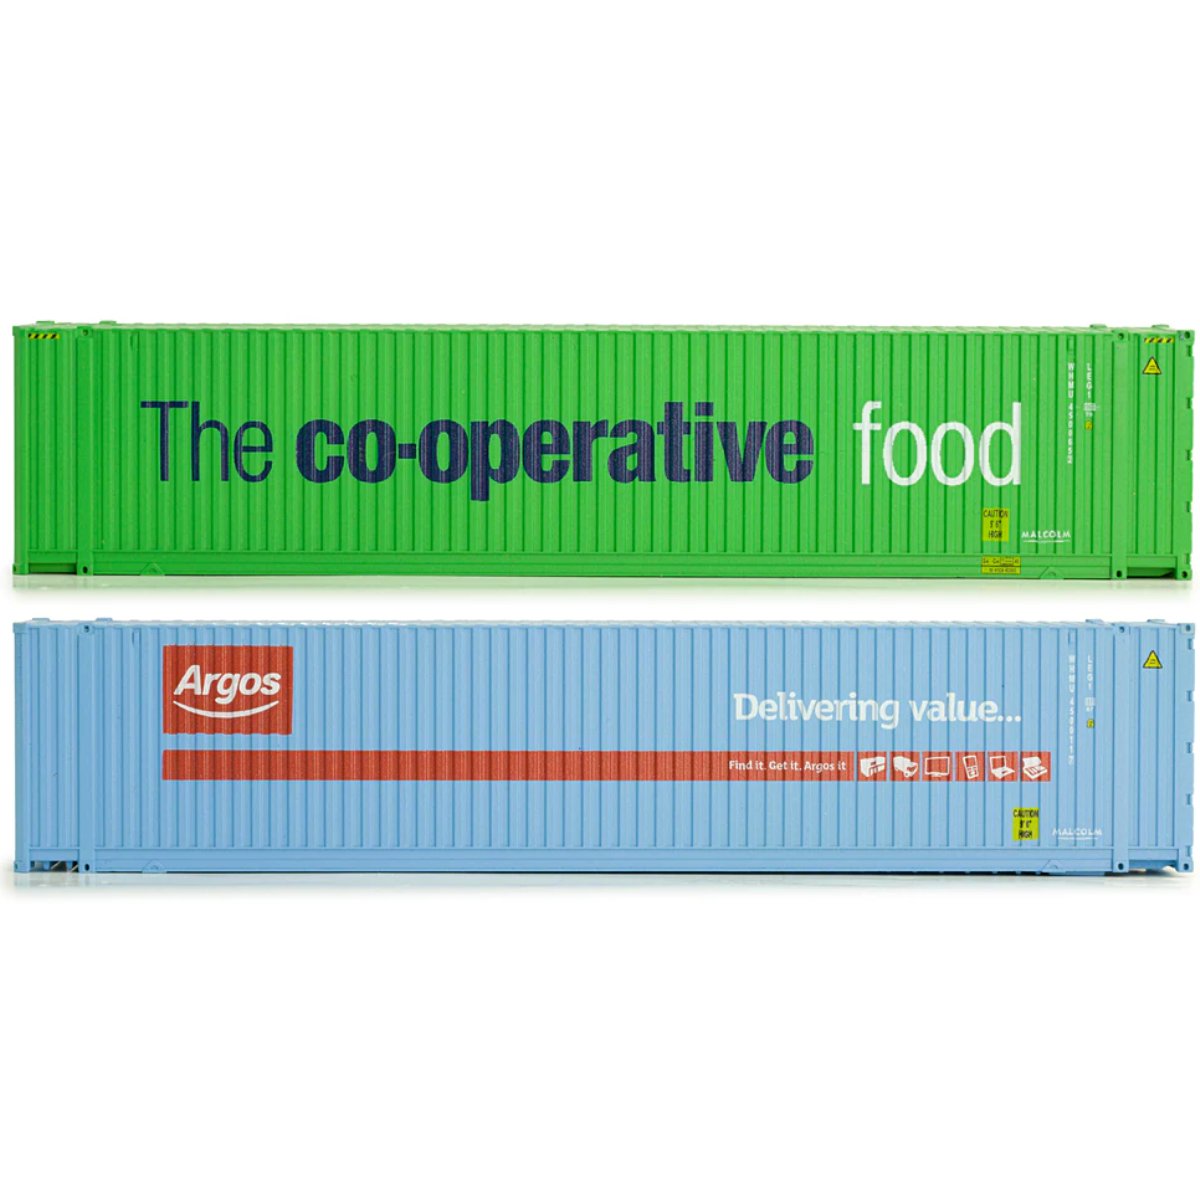 Dapol 4F-028-002 Hi-Cube Container Pack (2) Argos/Co-Op Weathered